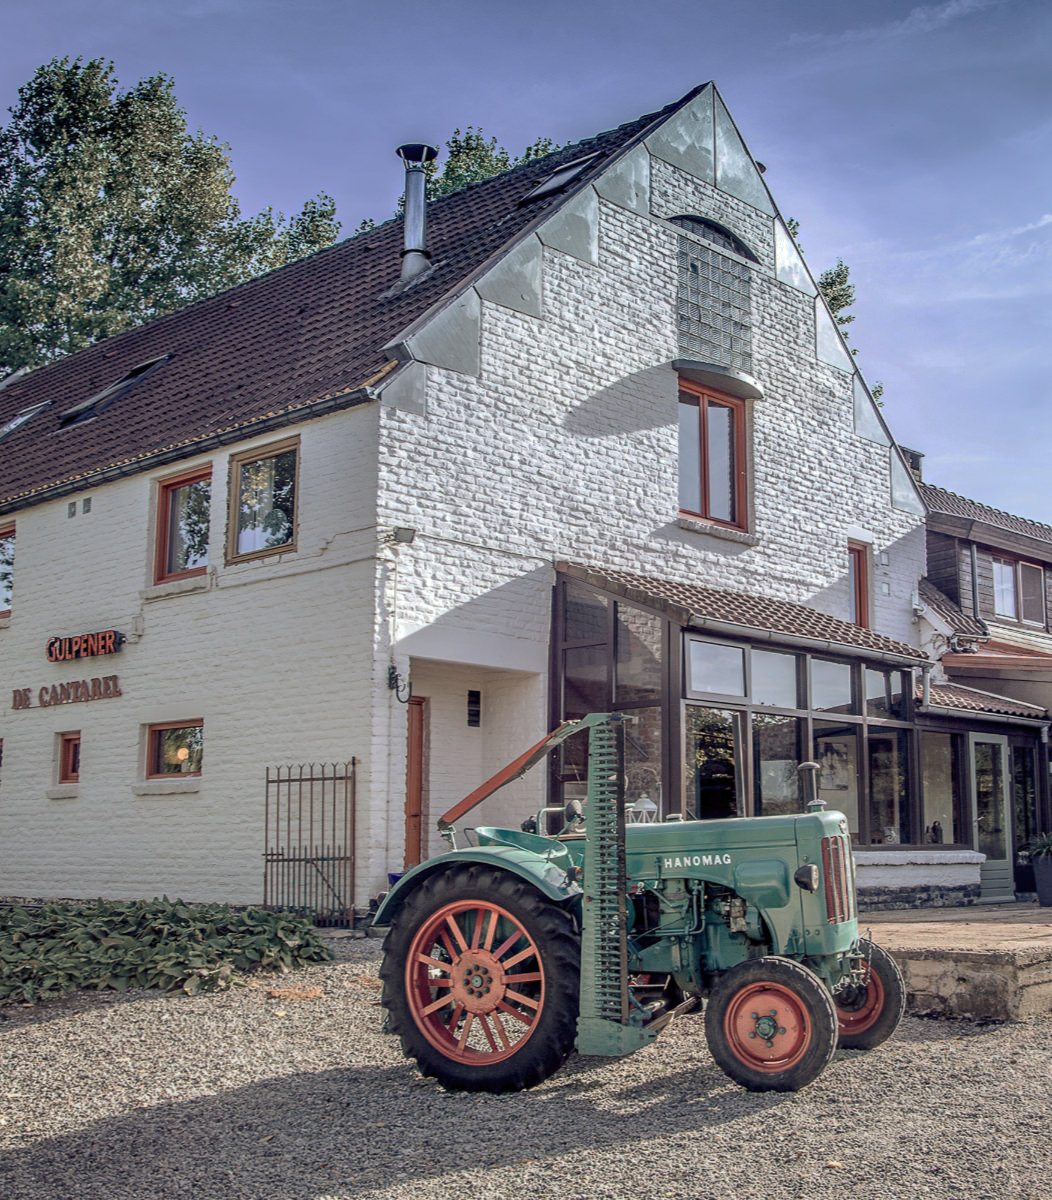 De Cantarel seen from the outside with an old tractor in front